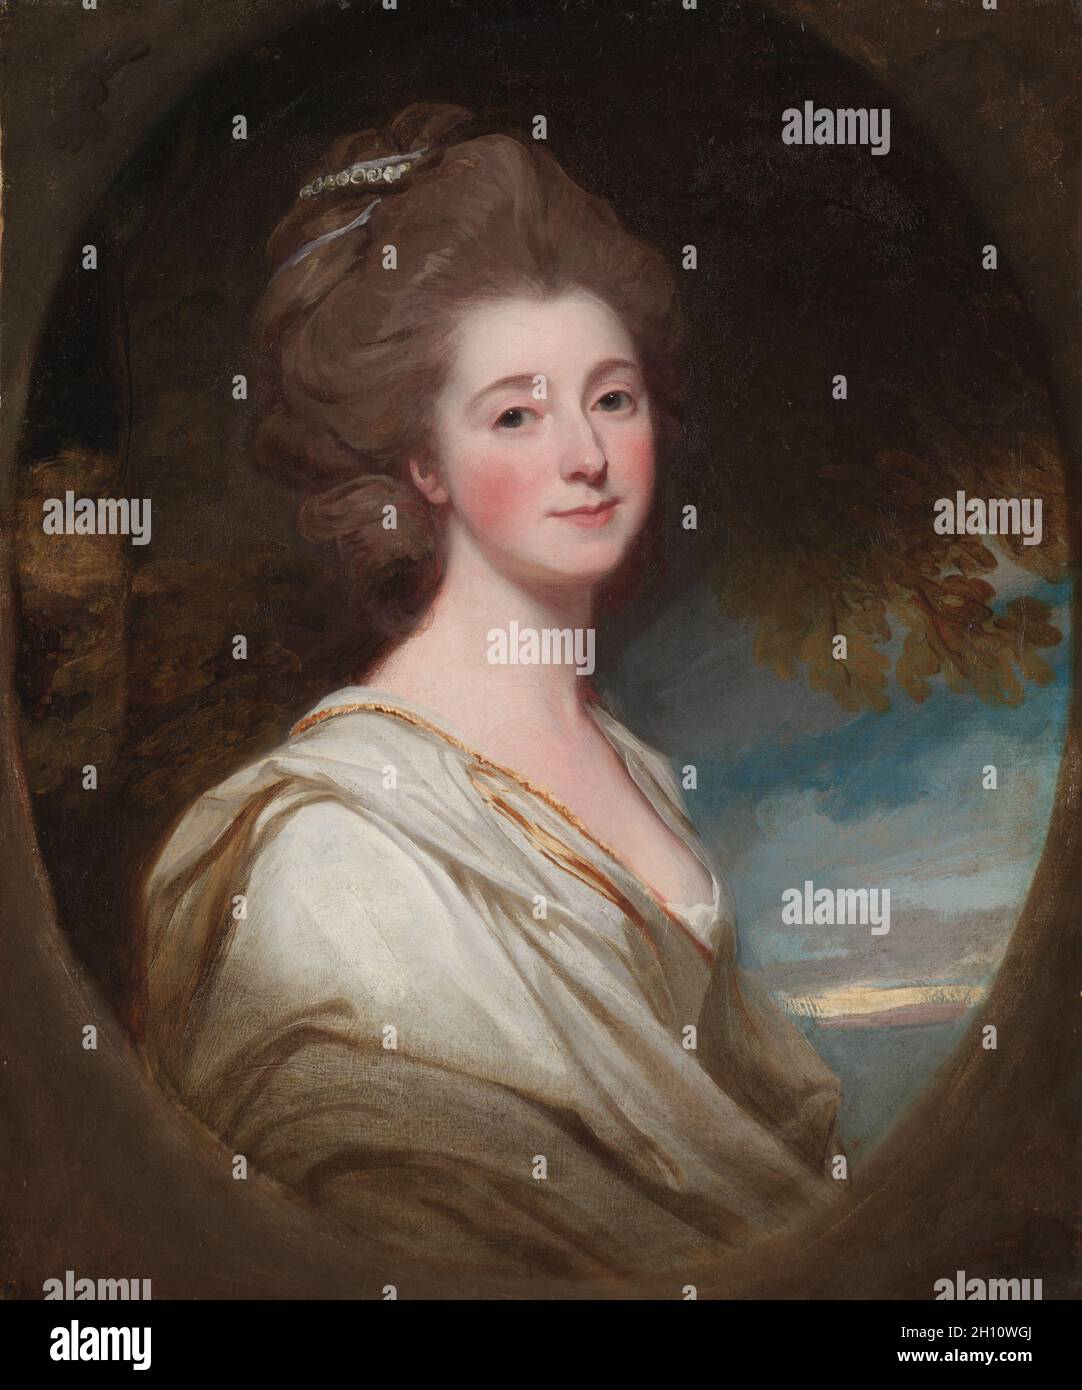 Portrait of Jane Hoskyns, c. 1778-1780. George Romney (British, 1734-1802). Oil on canvas; framed: 102 x 89 x 10.5 cm (40 3/16 x 35 1/16 x 4 1/8 in.); unframed: 69.8 x 59 cm (27 1/2 x 23 1/4 in.). Stock Photo